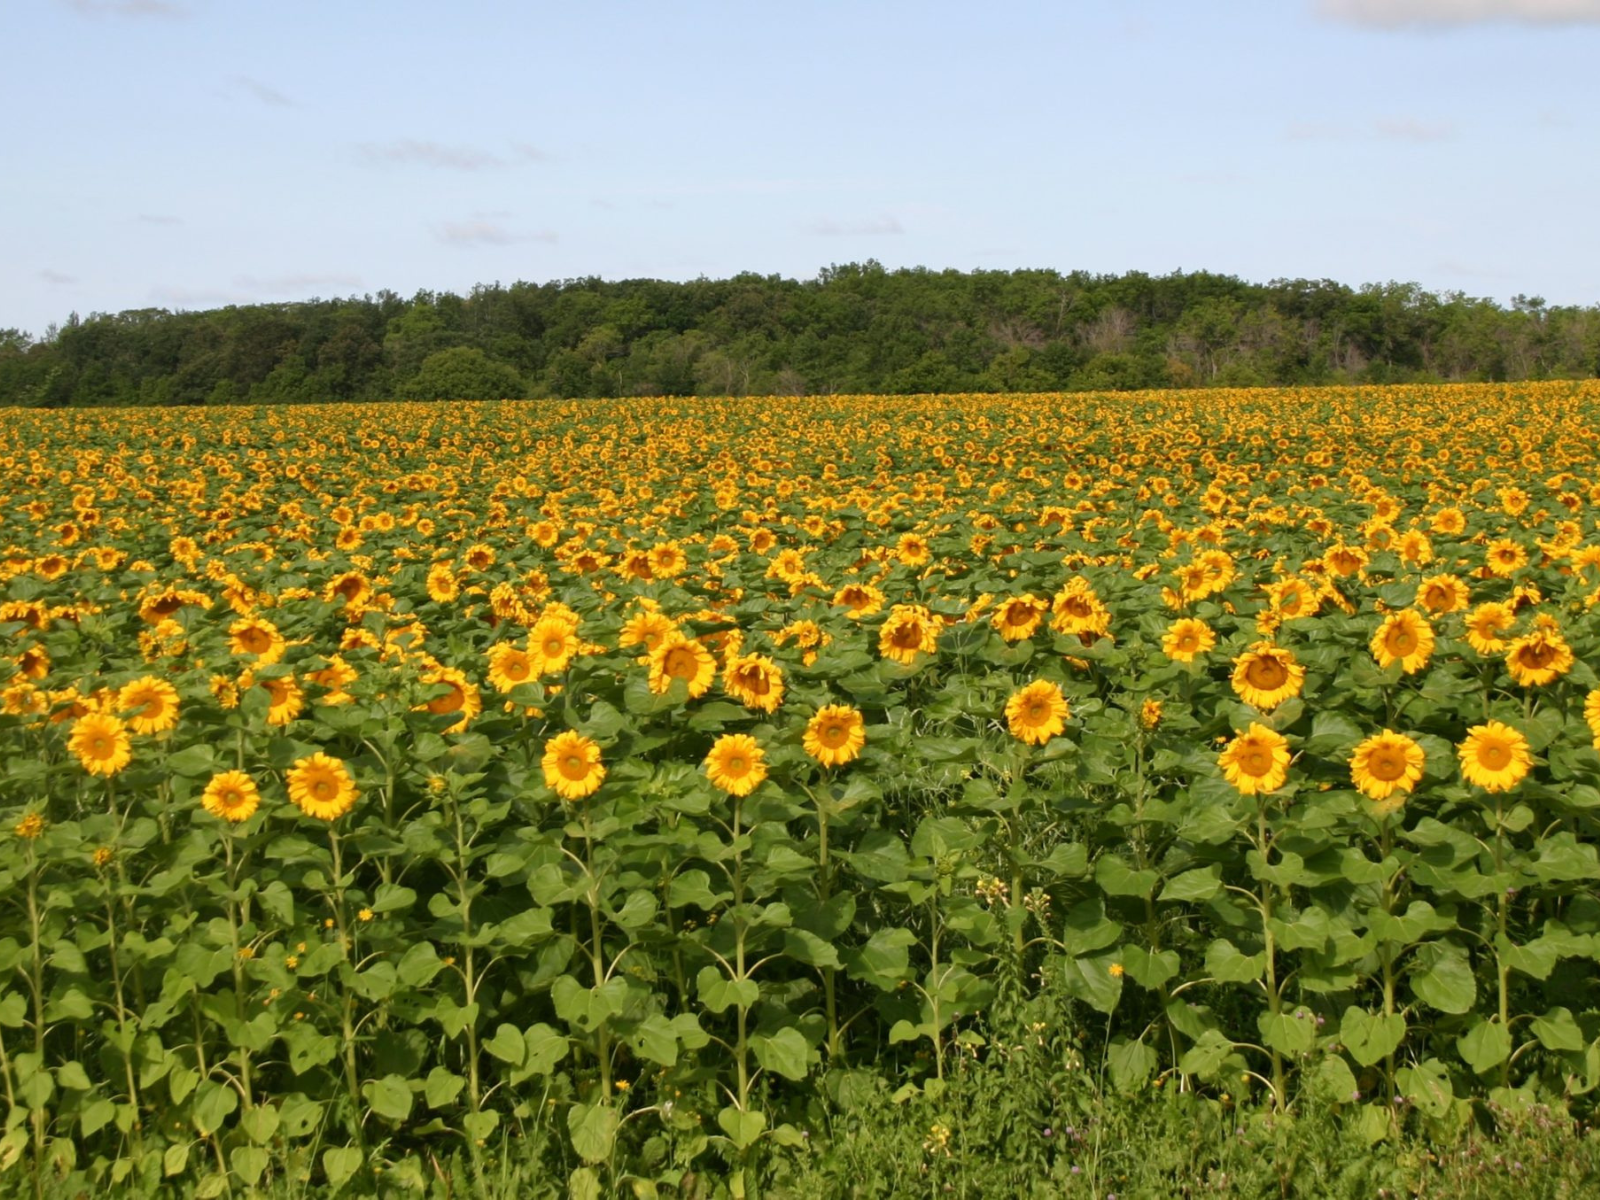 A field of yellow sunflowers against a blue sky.